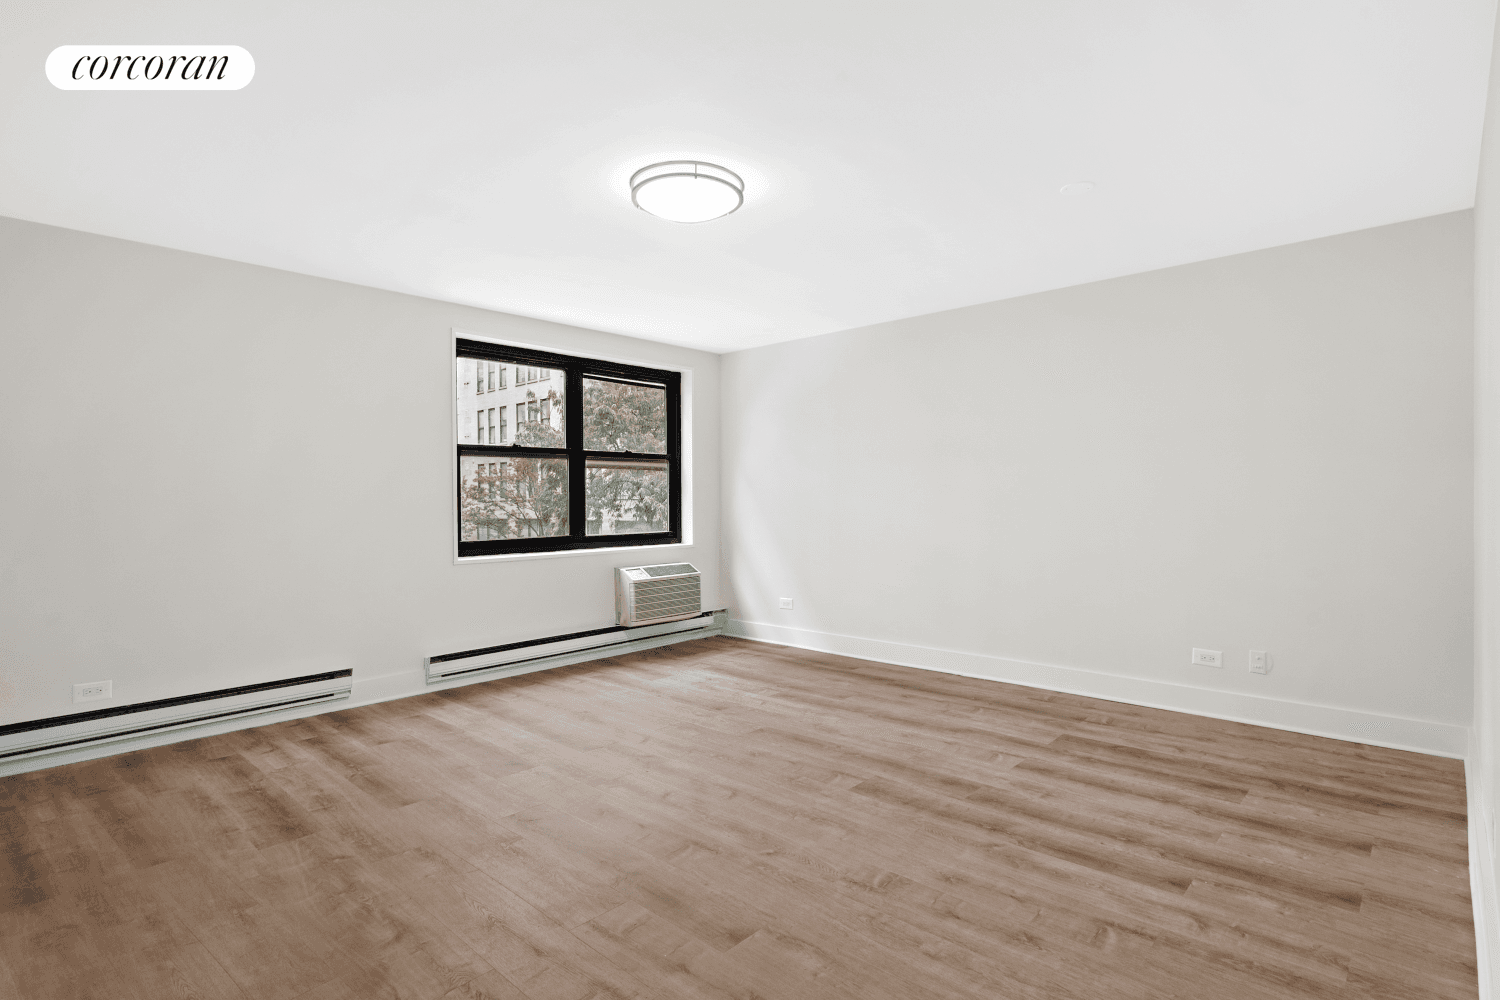 Brand new 2 bedroom 1 bath apartment in West Village, with bright Eastern views of cobblestone street and partial Hudson River views to the West, only one block from Hudson ...